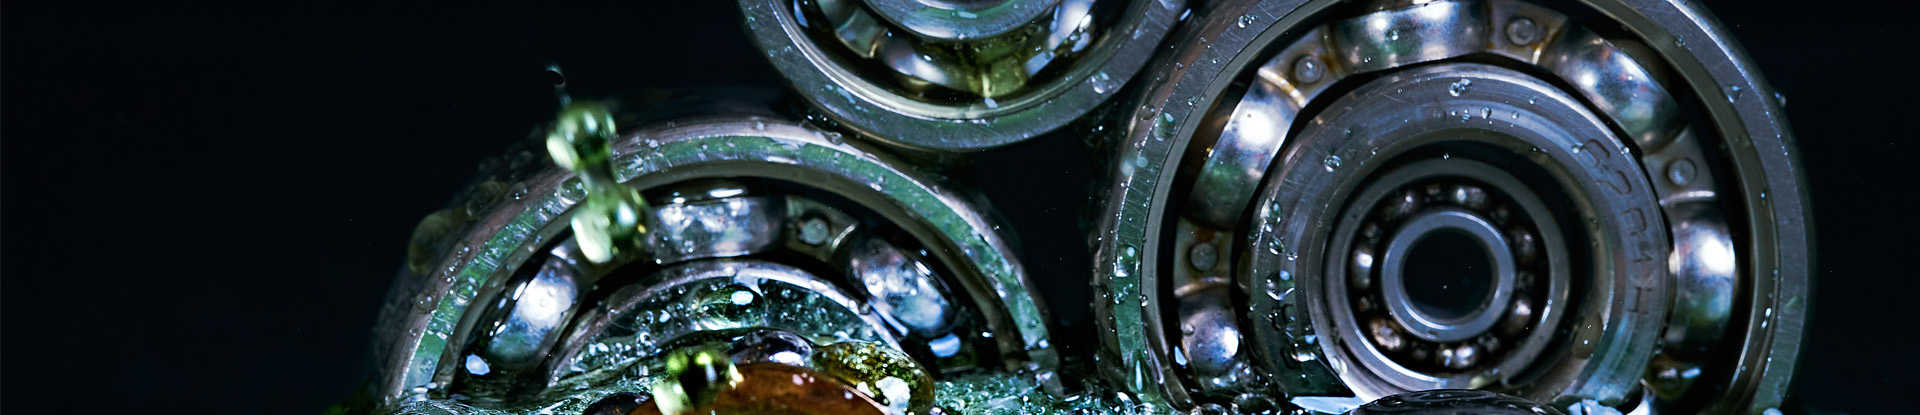 silver gears with green liquid falling around it